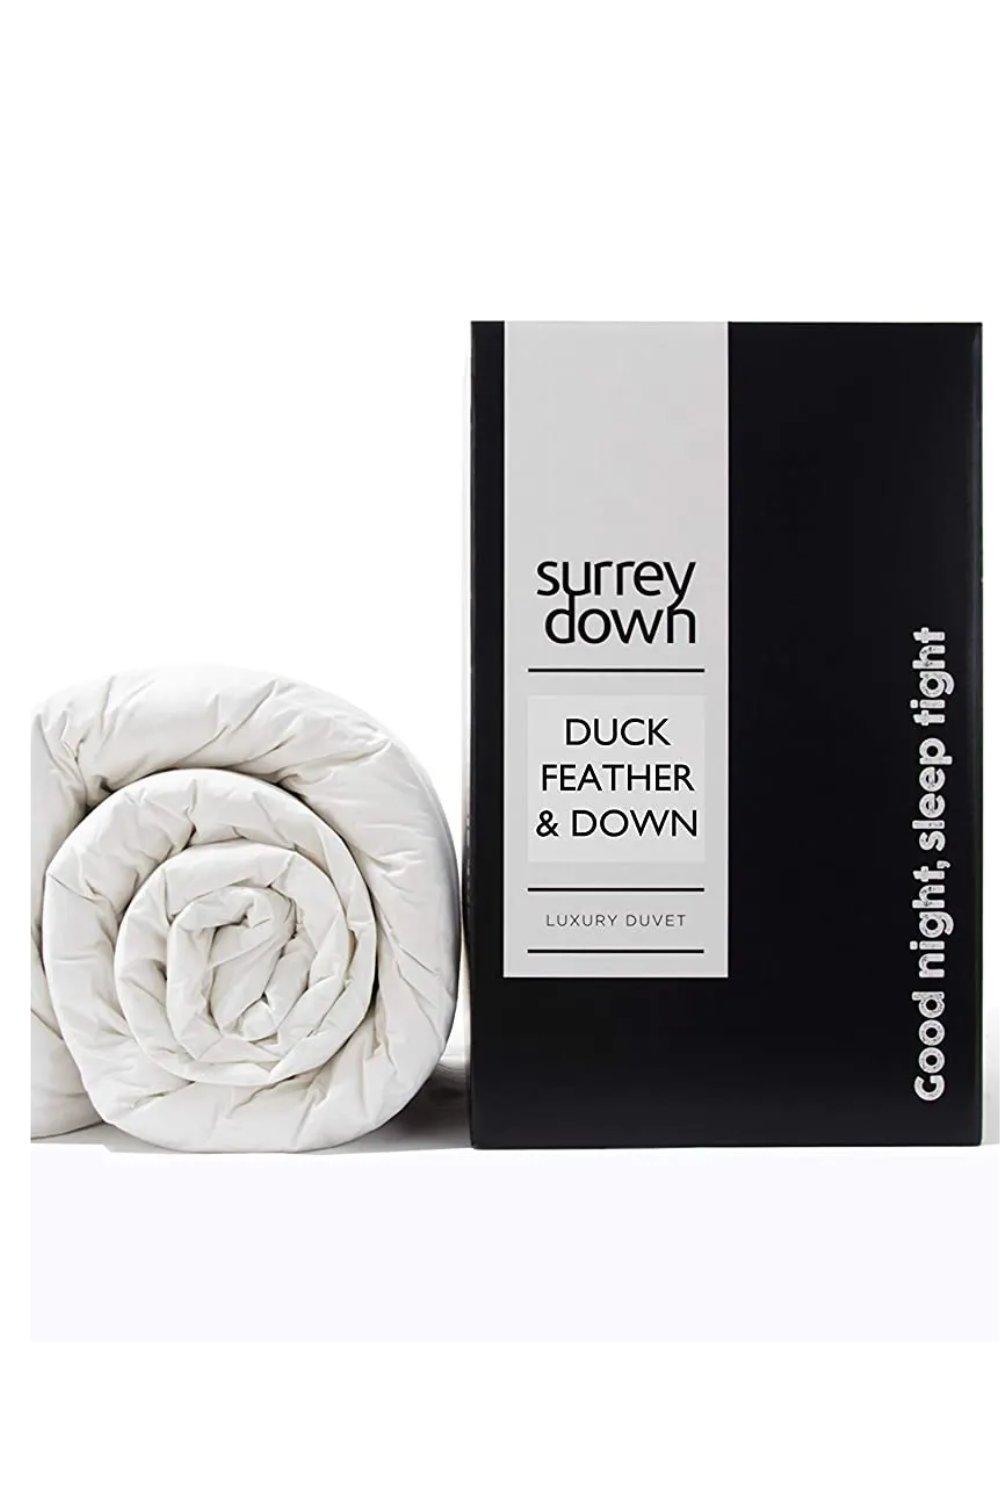 Duck Feather & Down 13.5tog Duvet